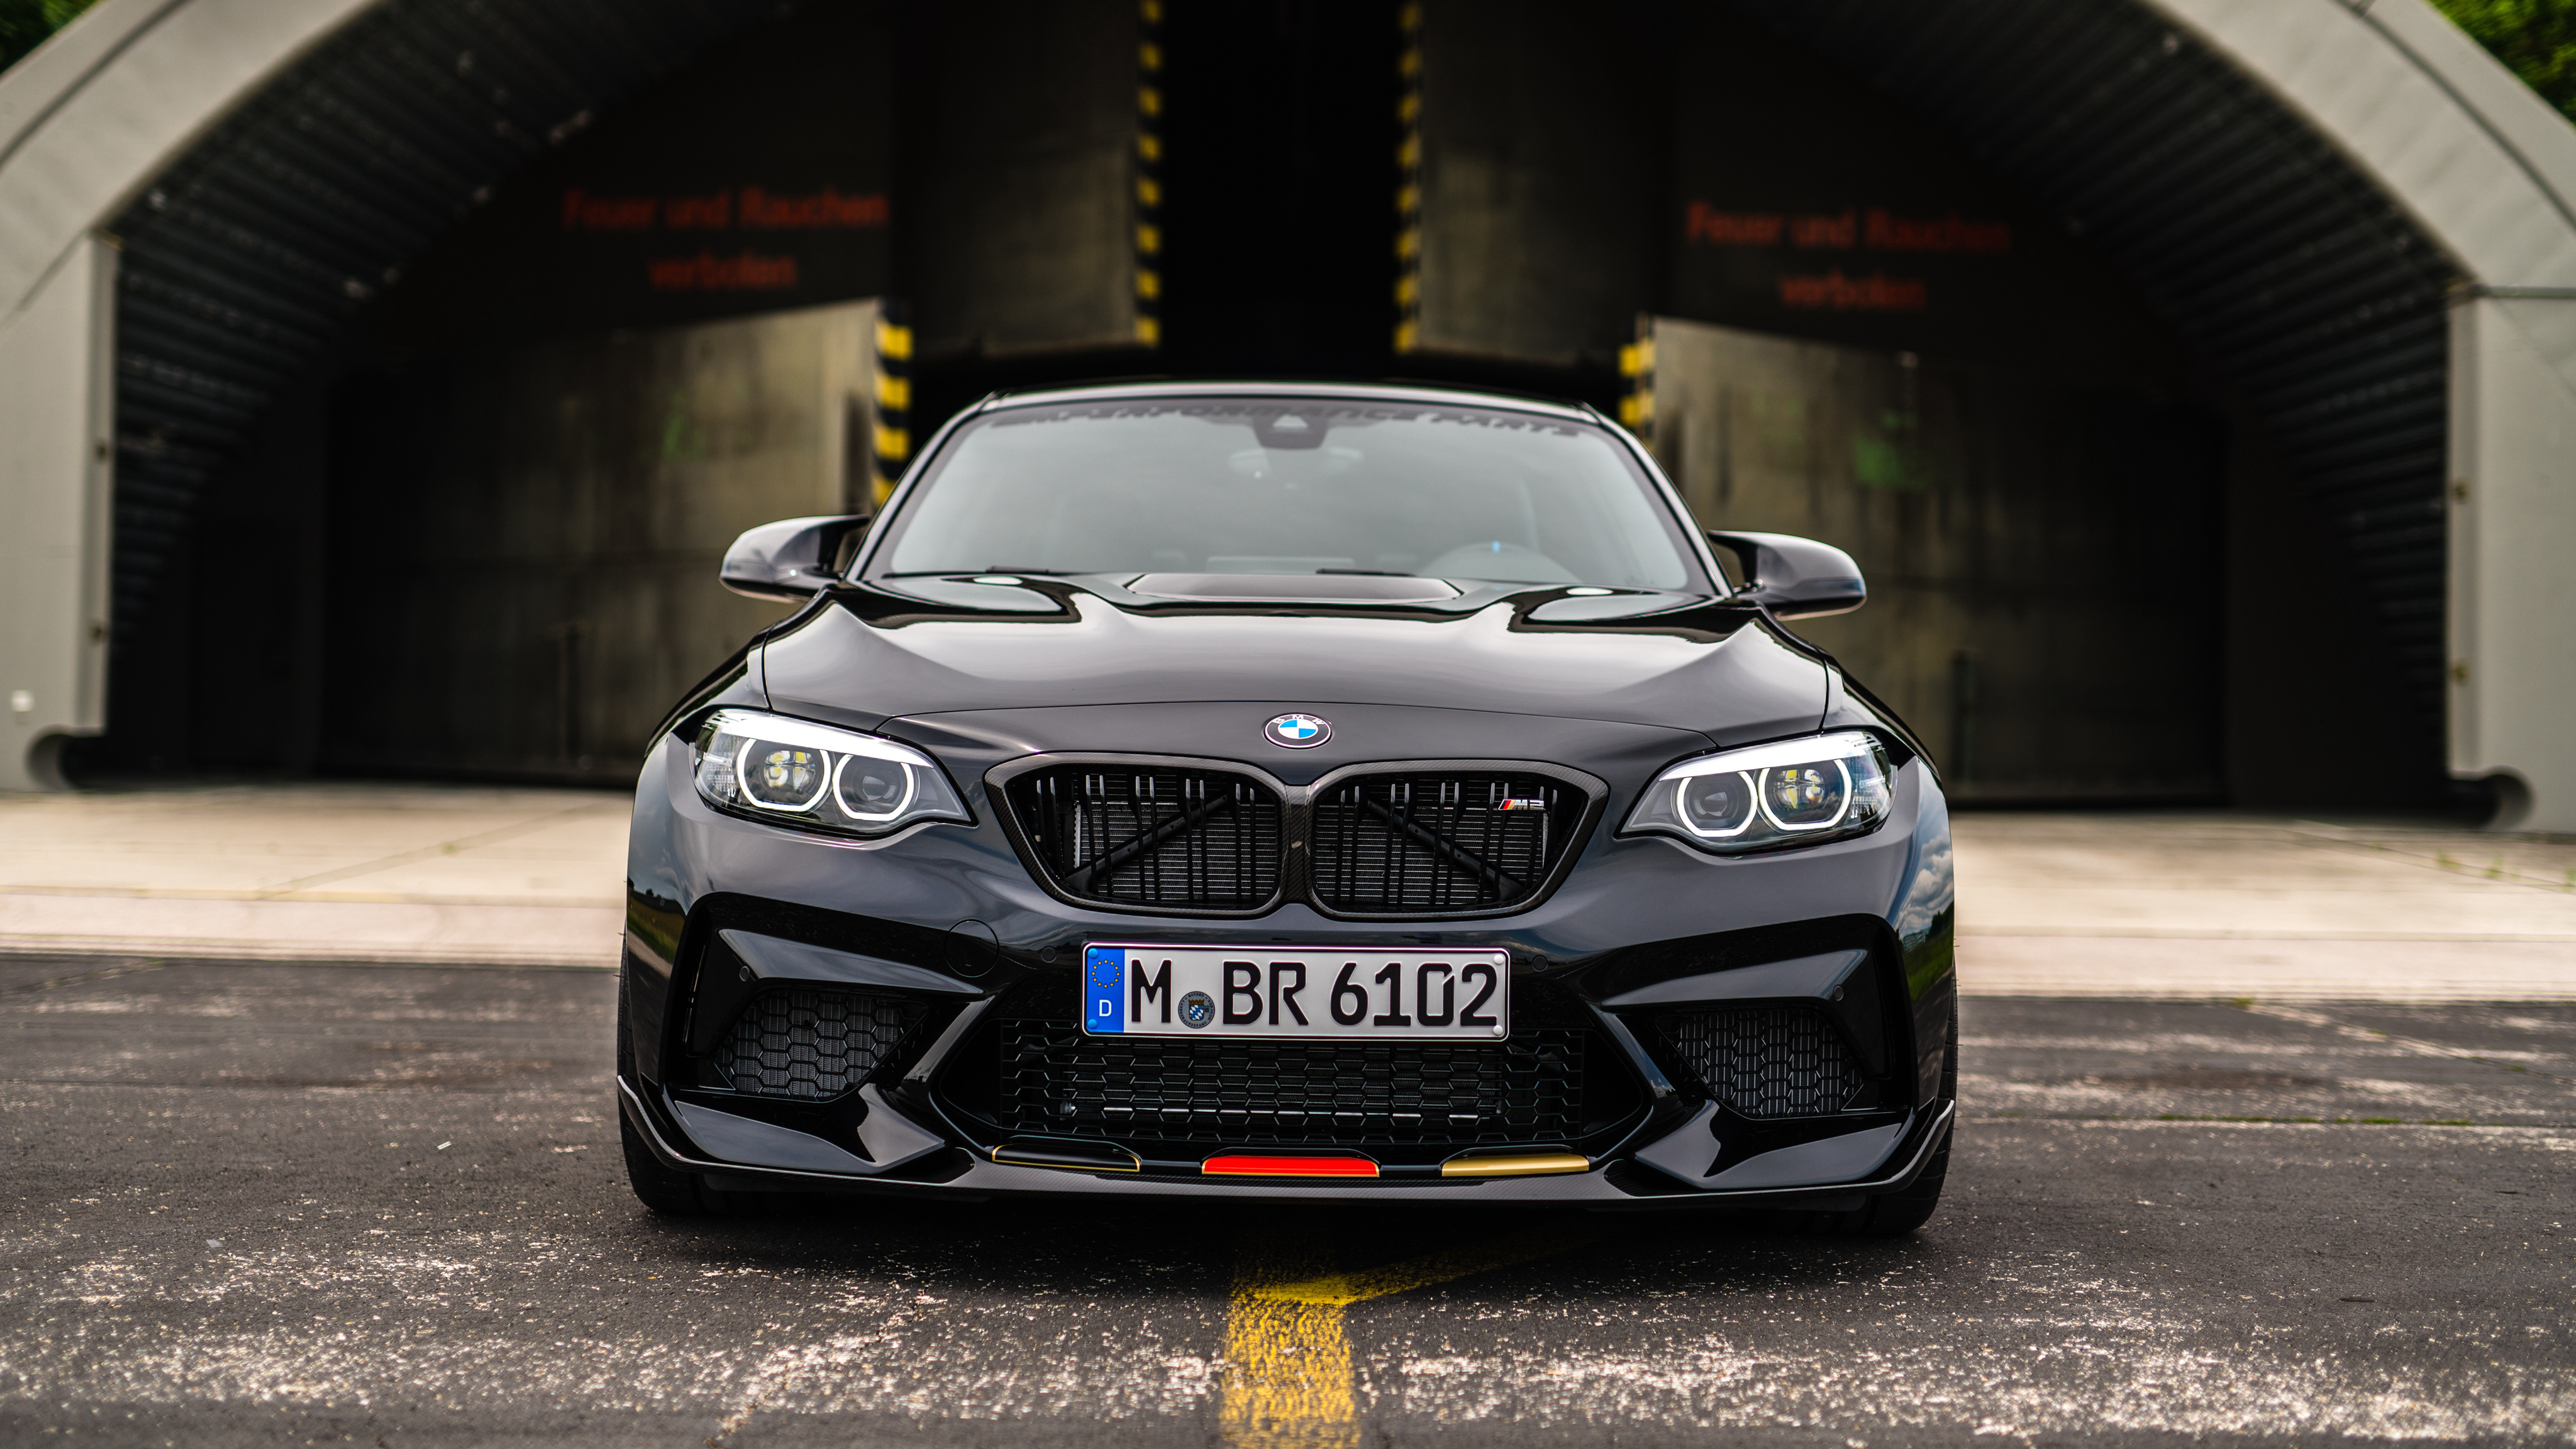 BMW M2 Competition M Performance Accessories 2018 4K Wallpaper